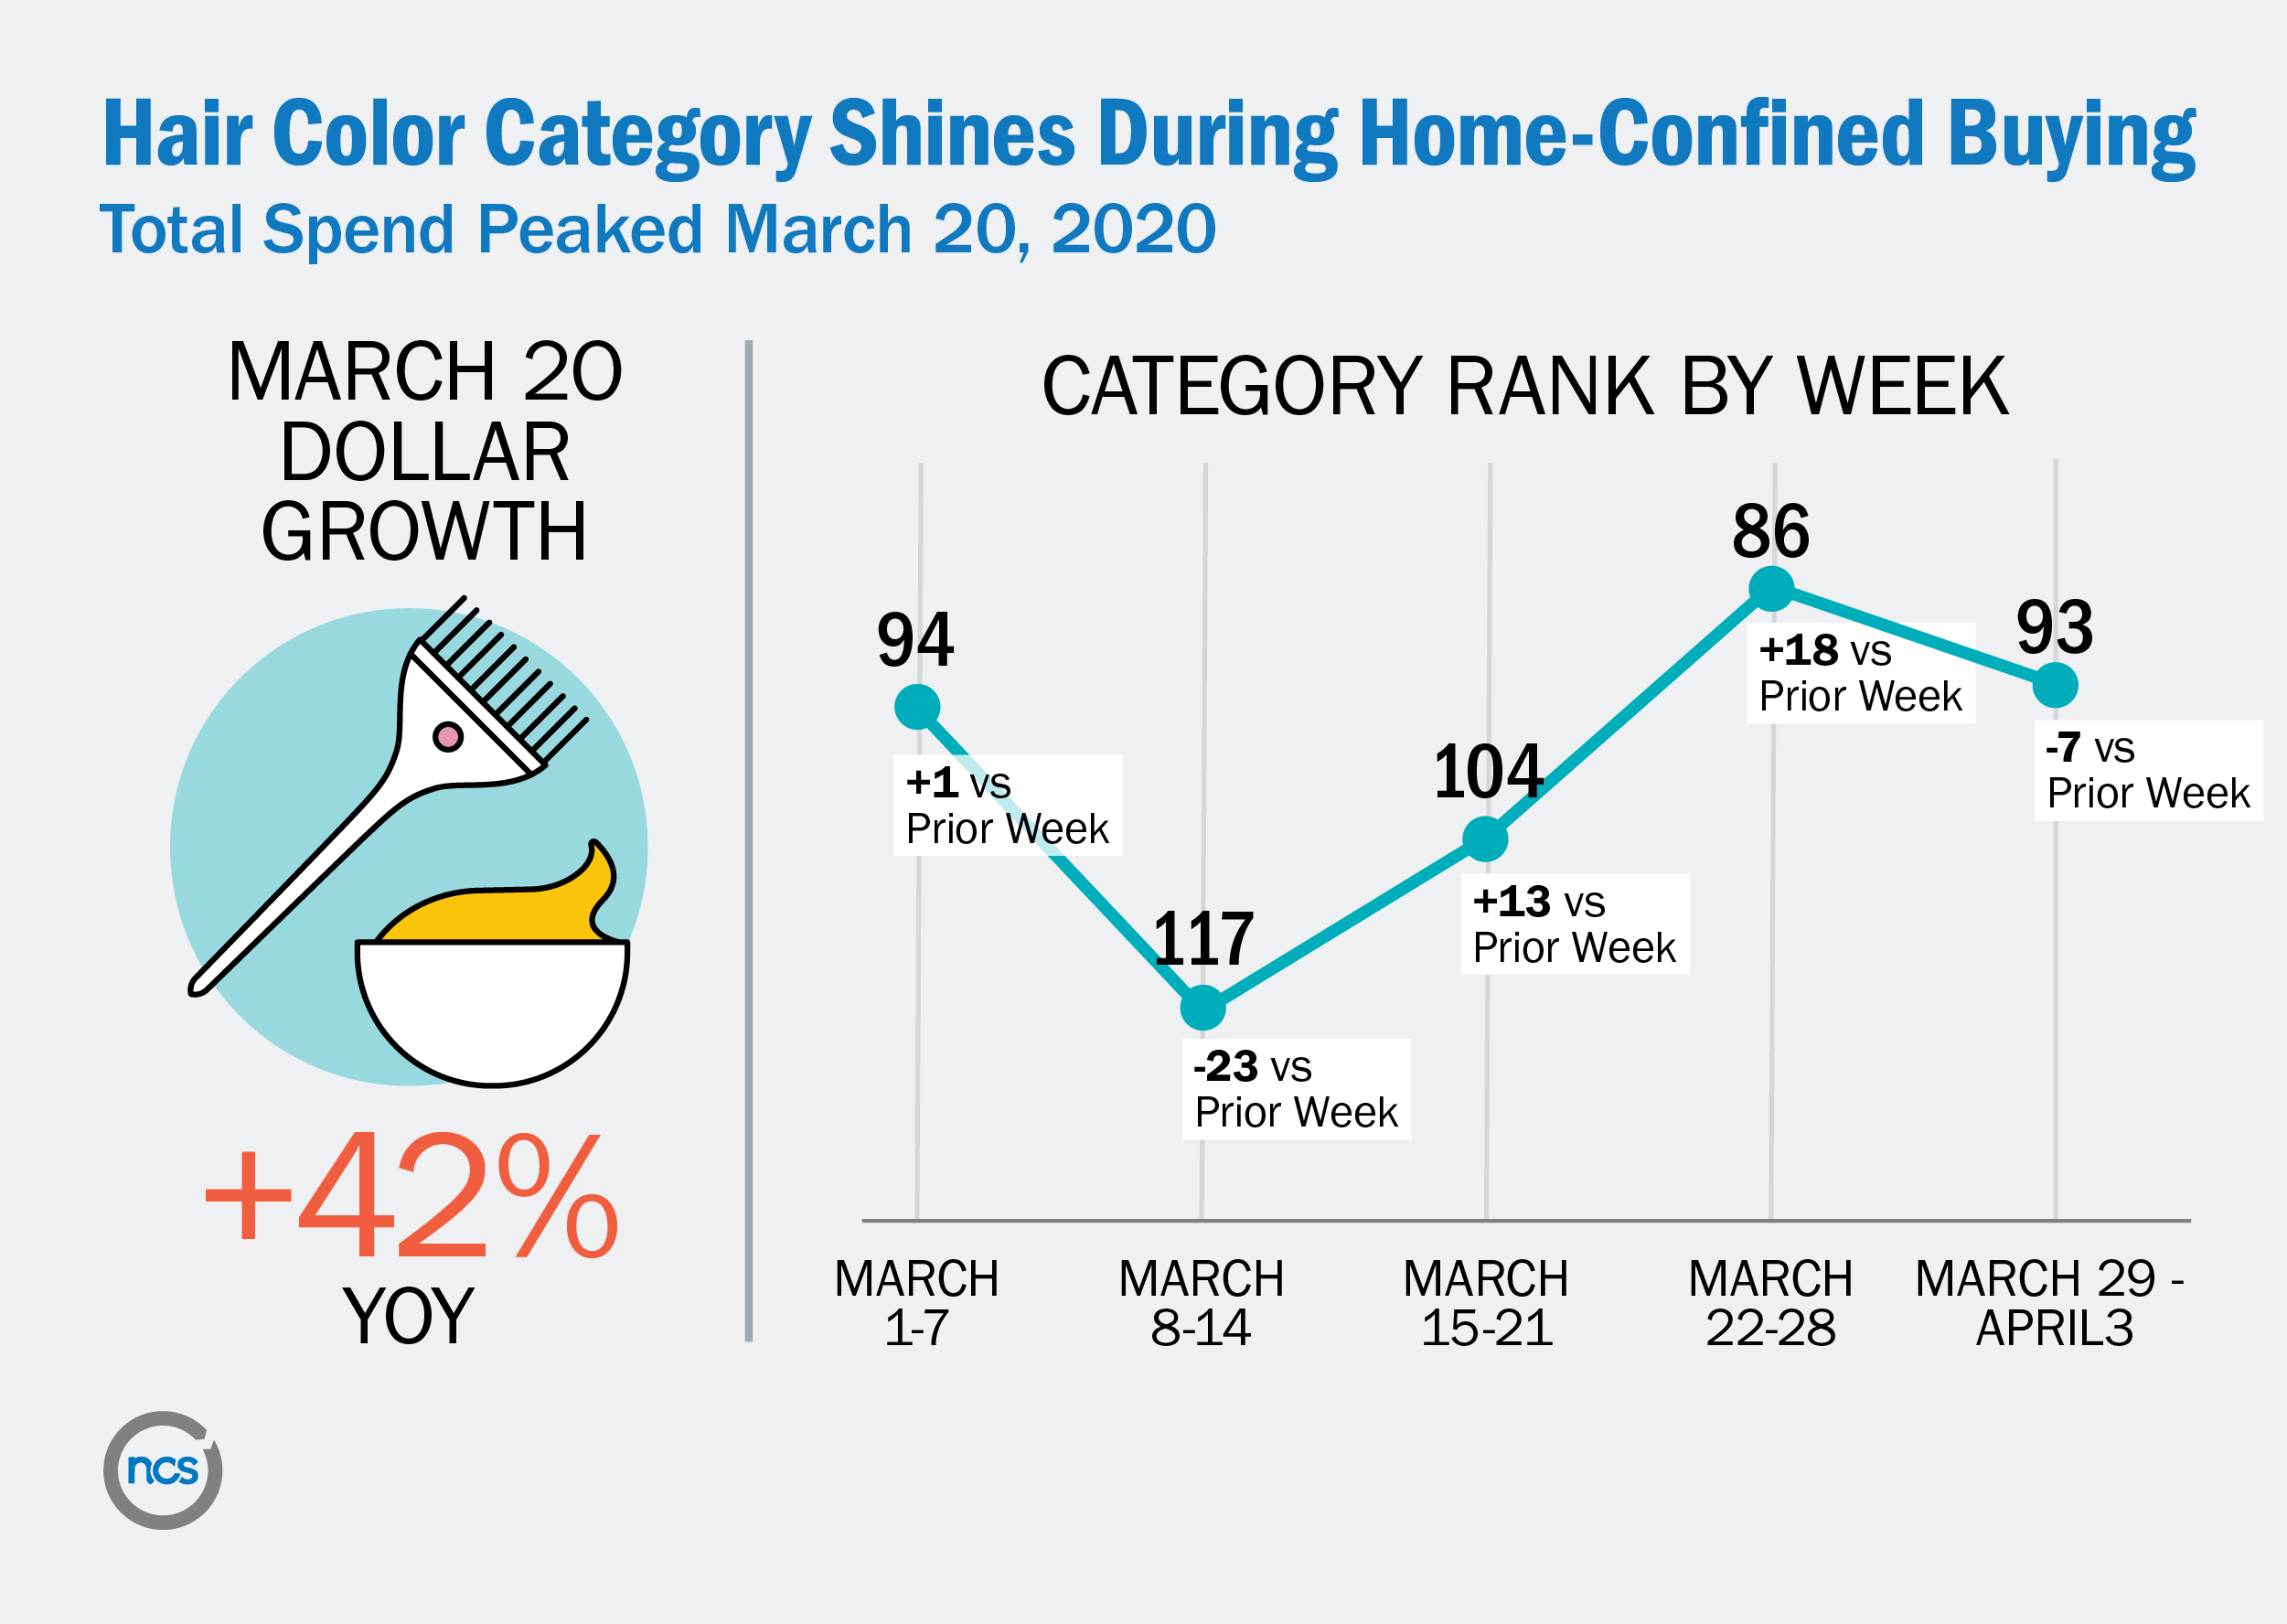 Hair color category spending peaks March 20, 2020 during home-confined buying phase of the pandemic.